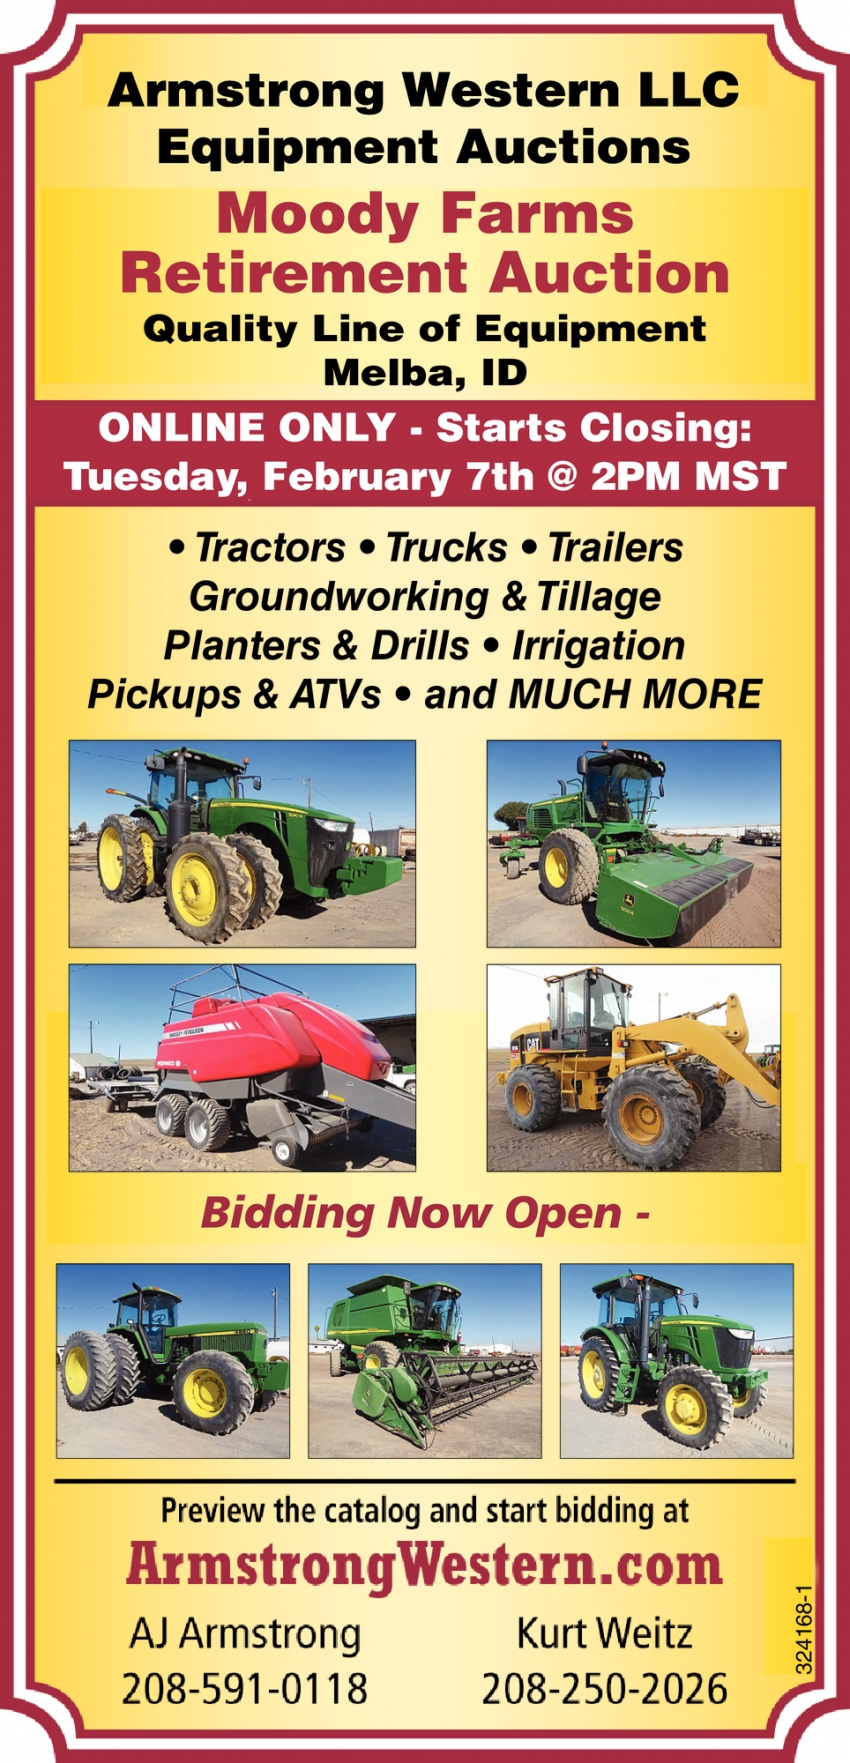 Moody Farms Retirement Auction